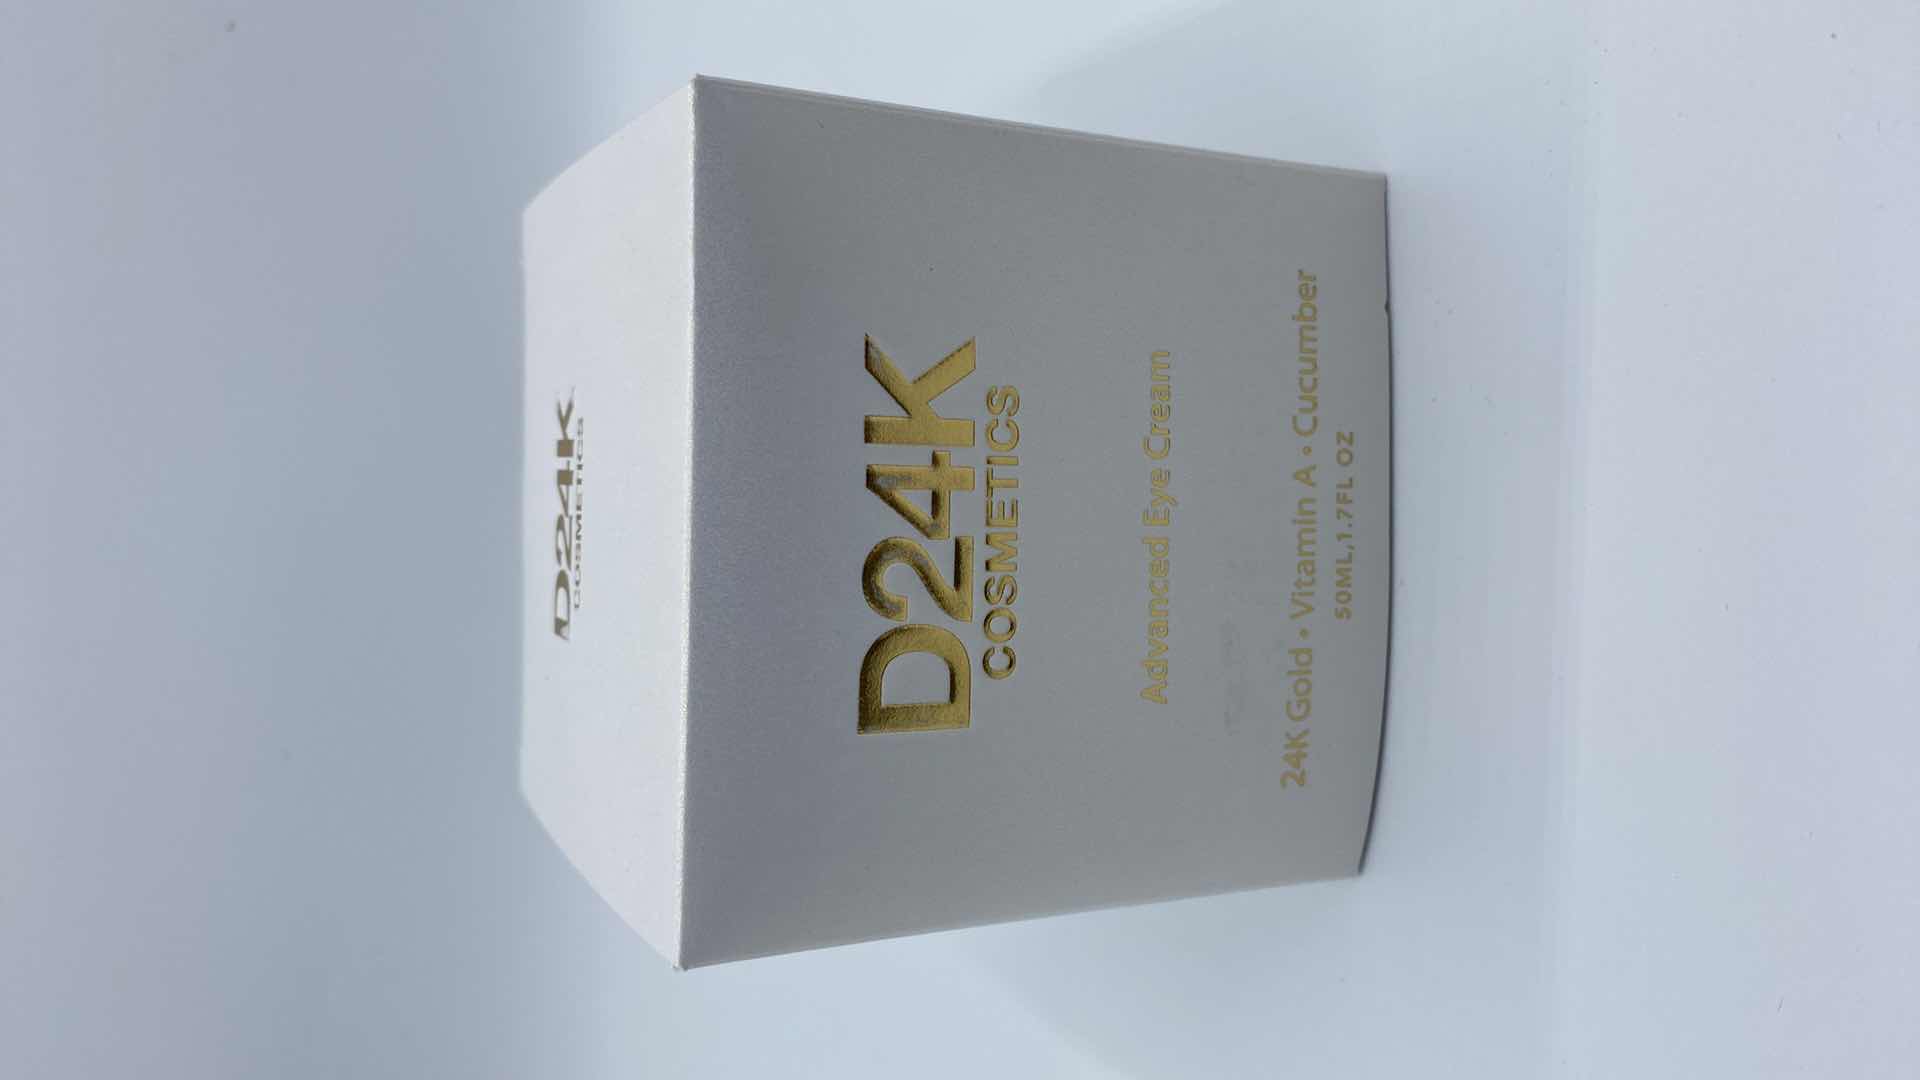 Photo 2 of NEW D24K ADVANCED EYE CREAM - SLOWS DEPLETION OF COLLAGEN AND STIMULATES CELL GROWTH FOR PLUMP LIFTED HYDRATED SKIN